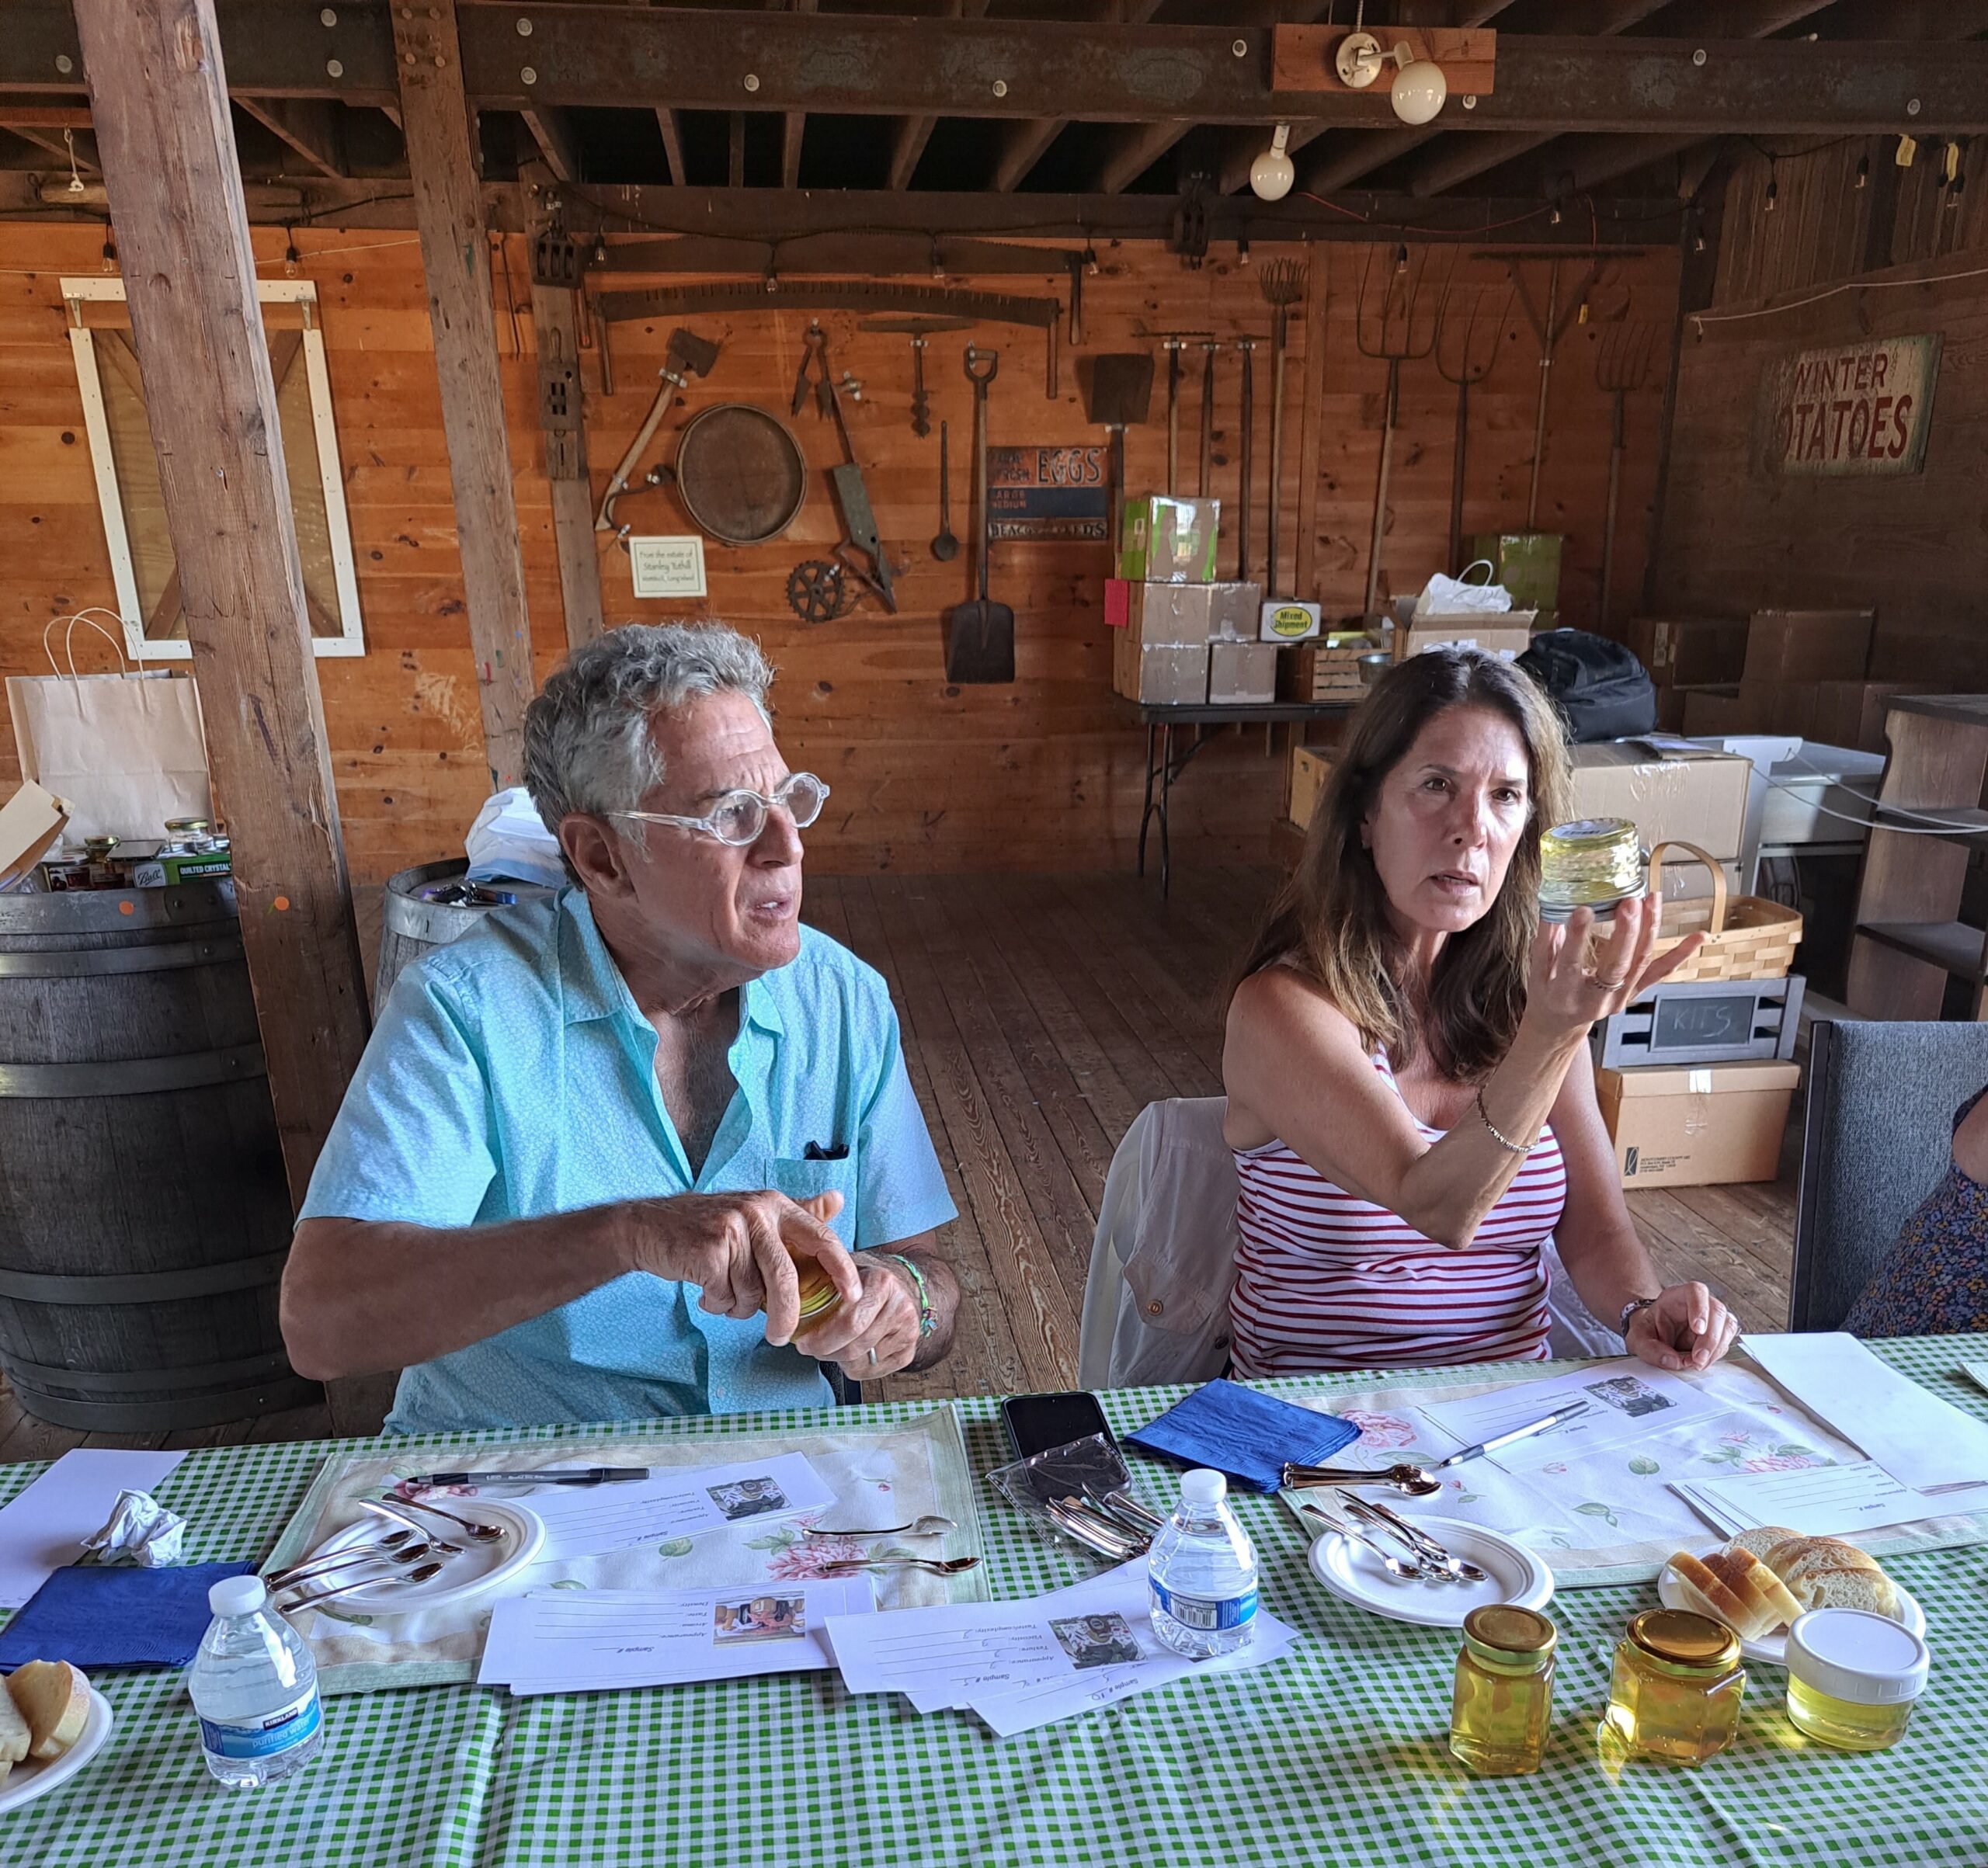 Bill Ritter and his wife, Kathleen Friery, evaluate a honey entry during preliminary judging of the Hallockville Museum Farm Jam and Honey Contest in the Naugles Barn at Hallockville. Final judging and winner selection is September 18 at the 41st Hallockville Country Fair and Craft Show.  COURTESY HALLOCKVILLE MUSEUM FARM